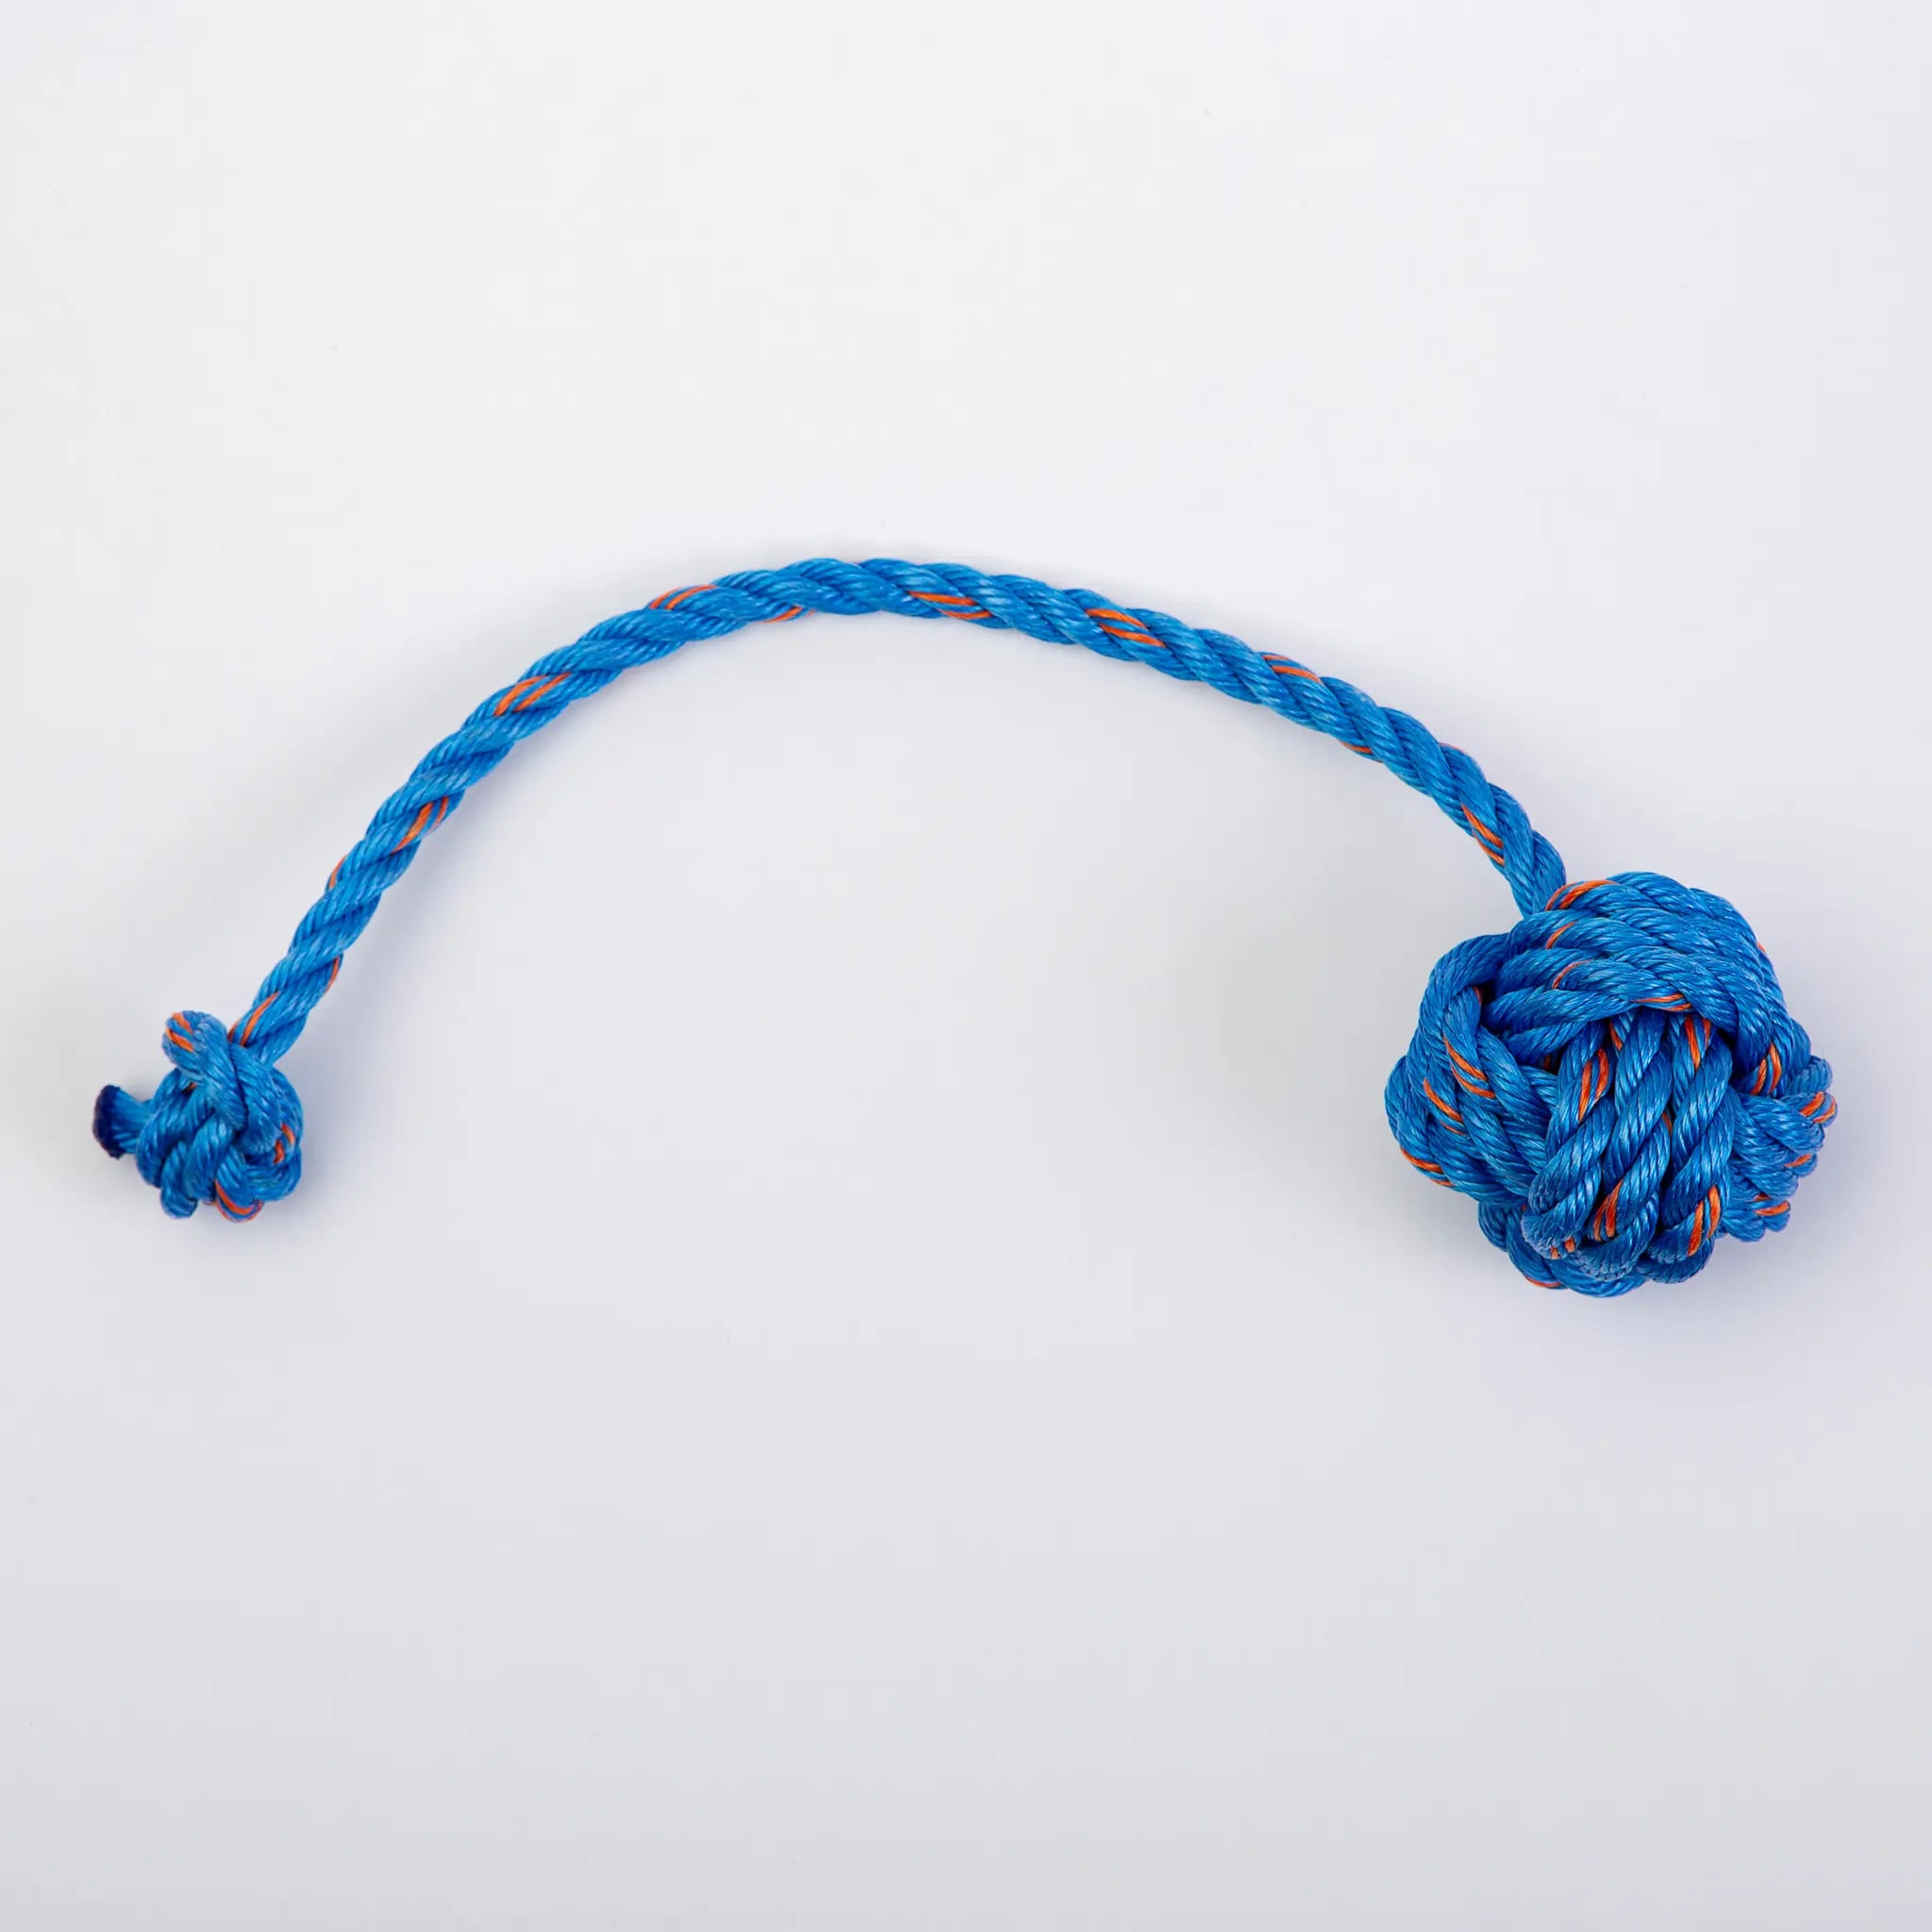 Floating Rope Fetch Toy, Maine Made Dog Toy